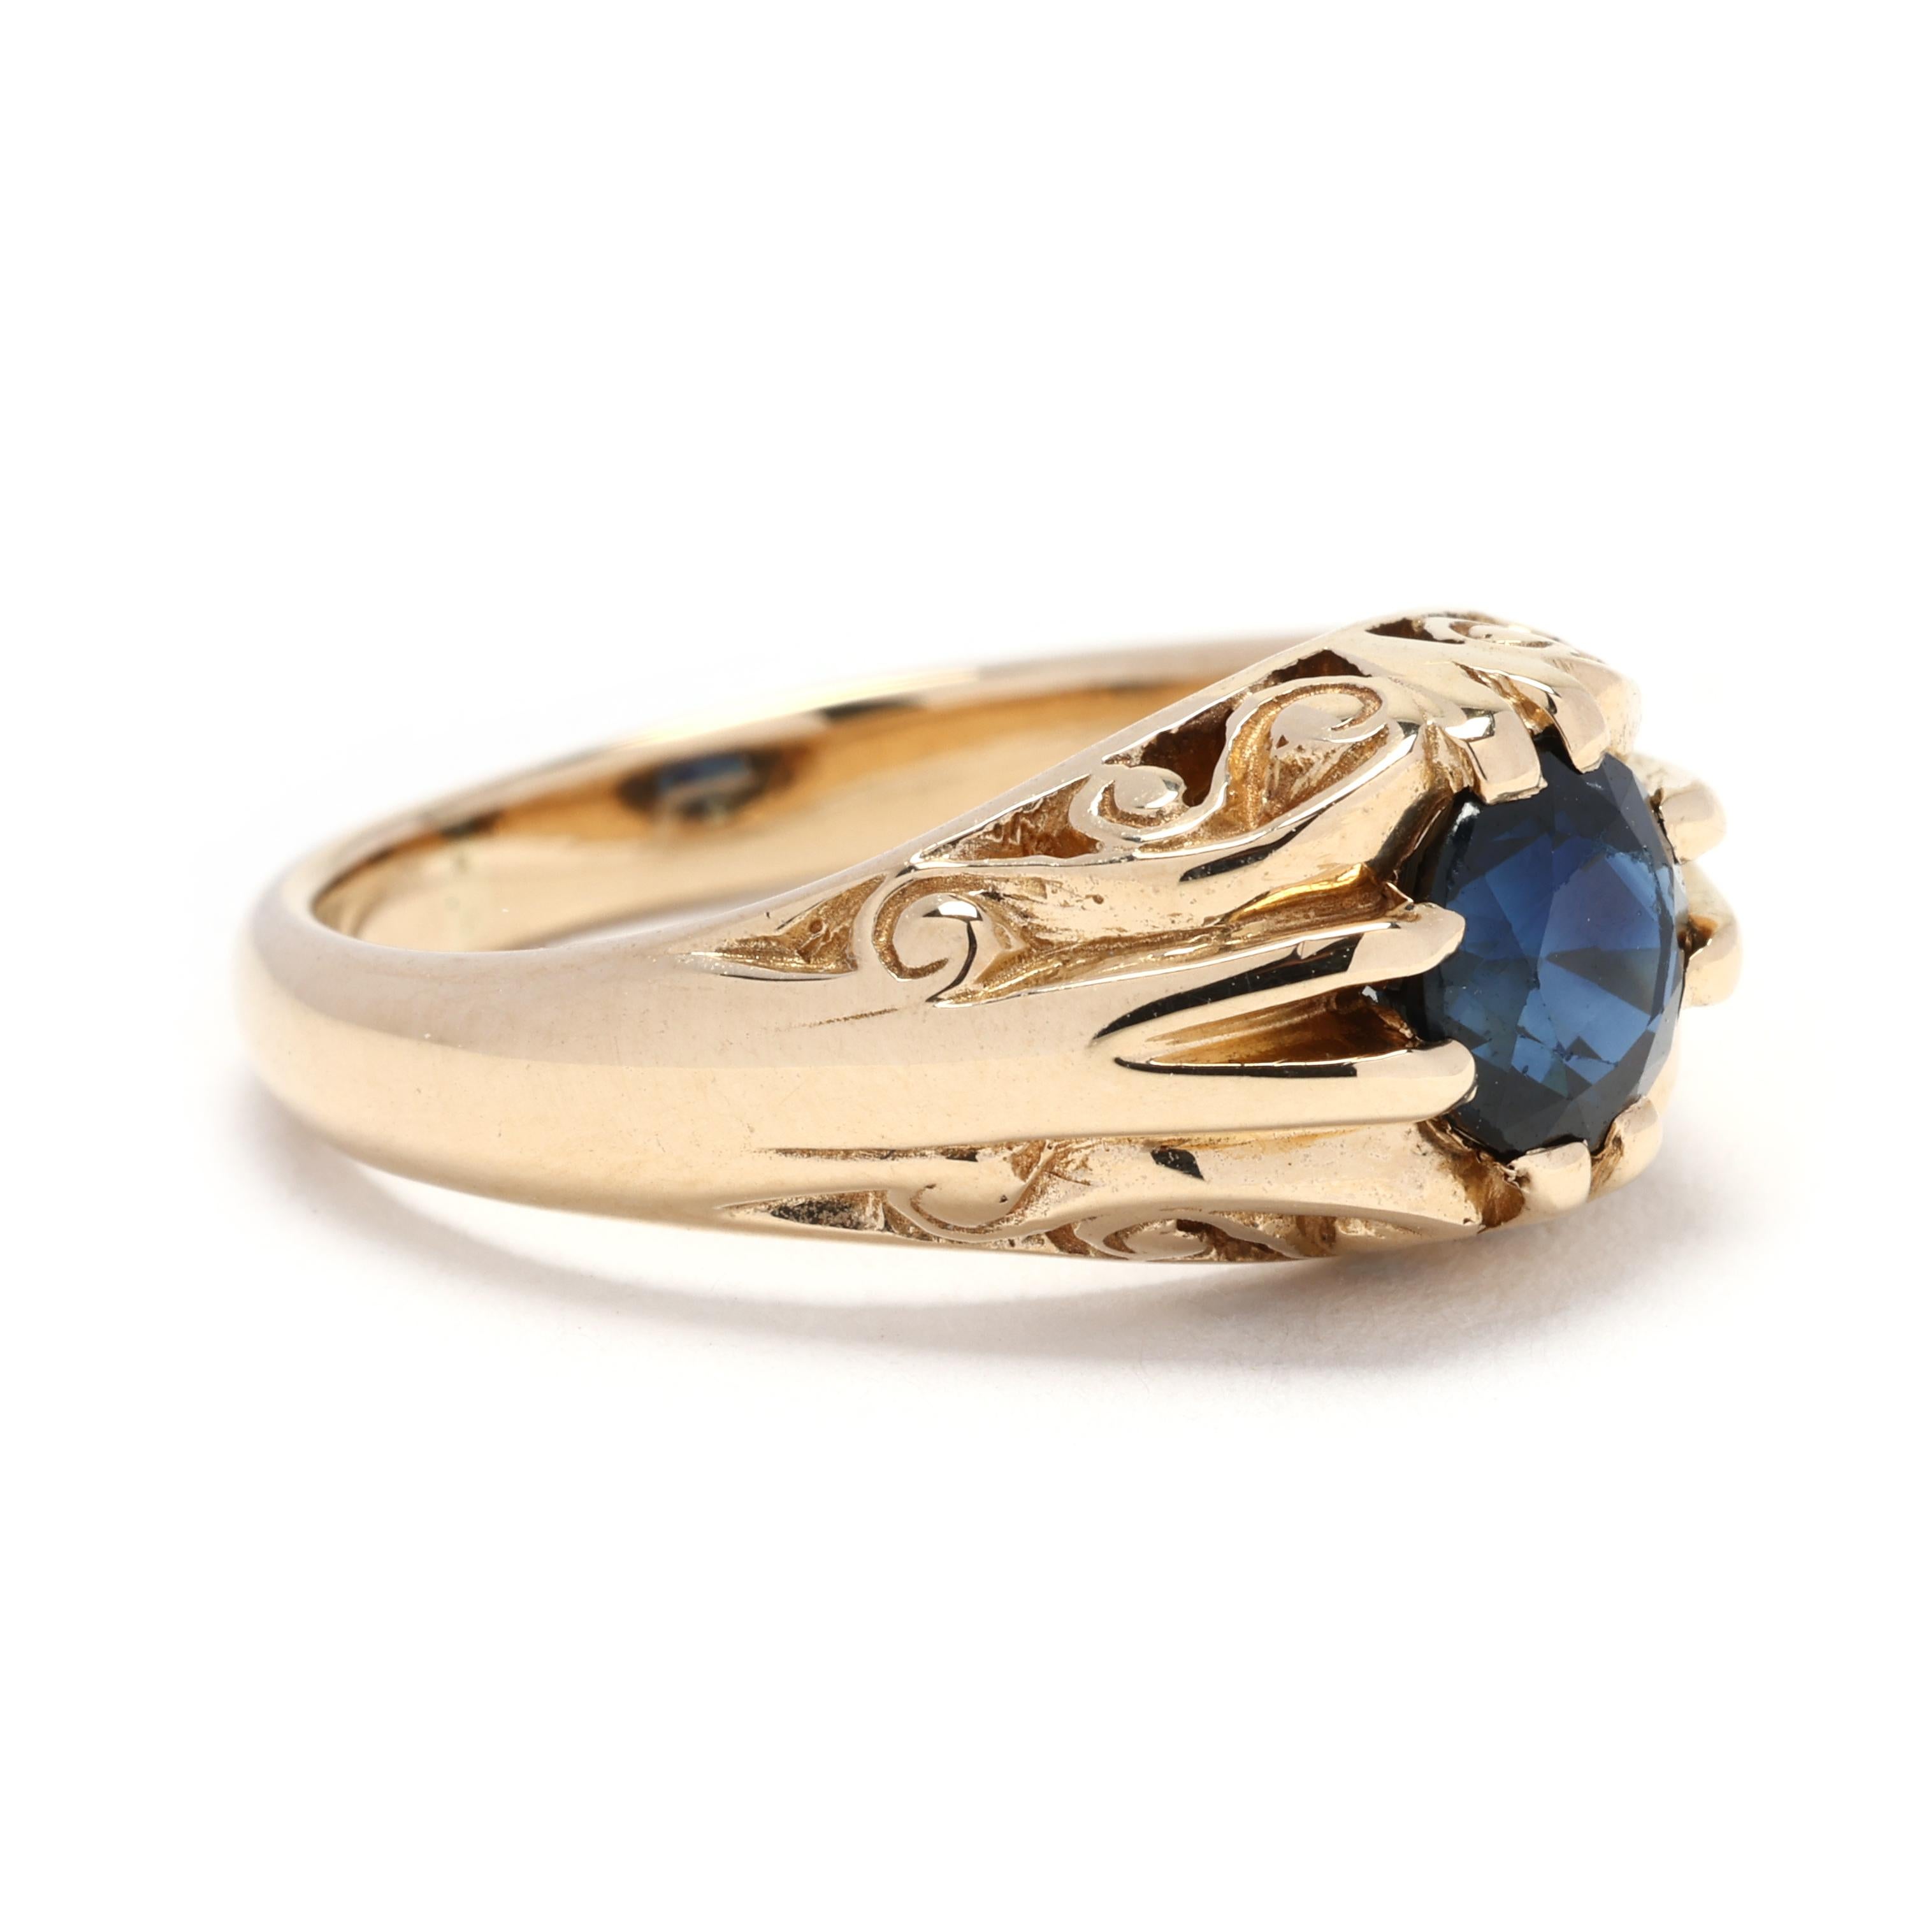 This antique 0.50ctw Sapphire Swirl Ring is a true vintage beauty. Crafted in 14k yellow gold, this ring showcases a swirl design adorned with stunning sapphires. The 0.50ctw sapphire stone create a mesmerizing blue hue that is sure to catch the